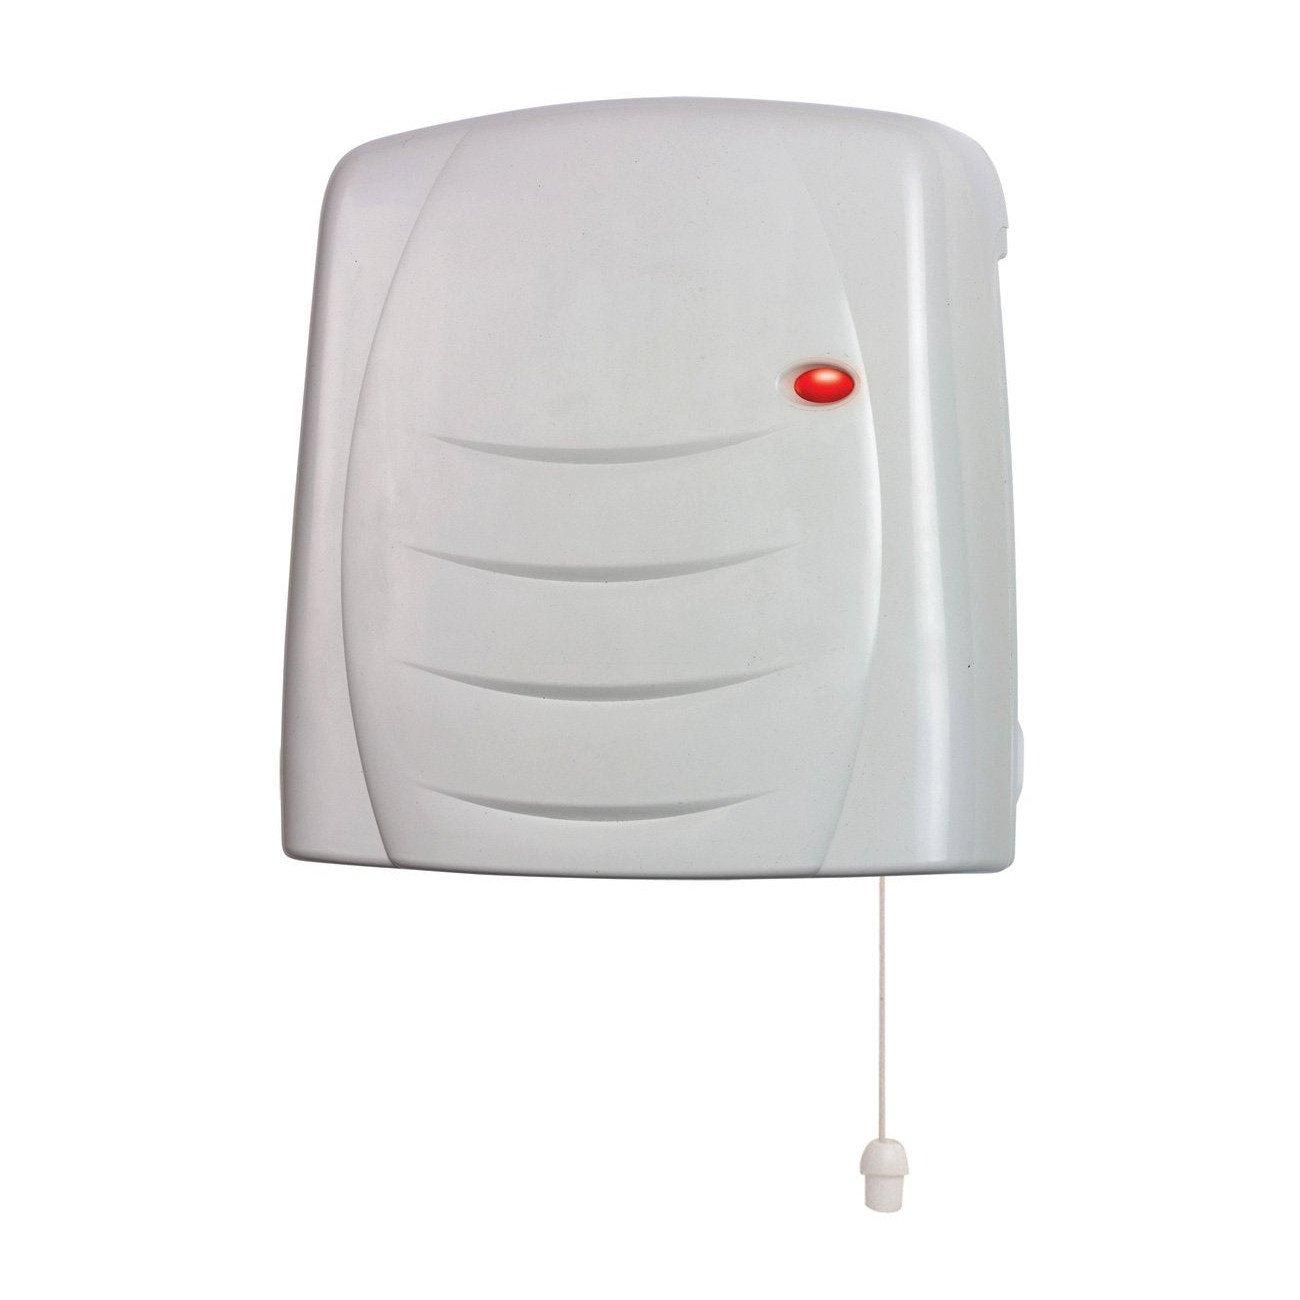 2KW 'Downflow Heater' IPX4 Rated with Timer